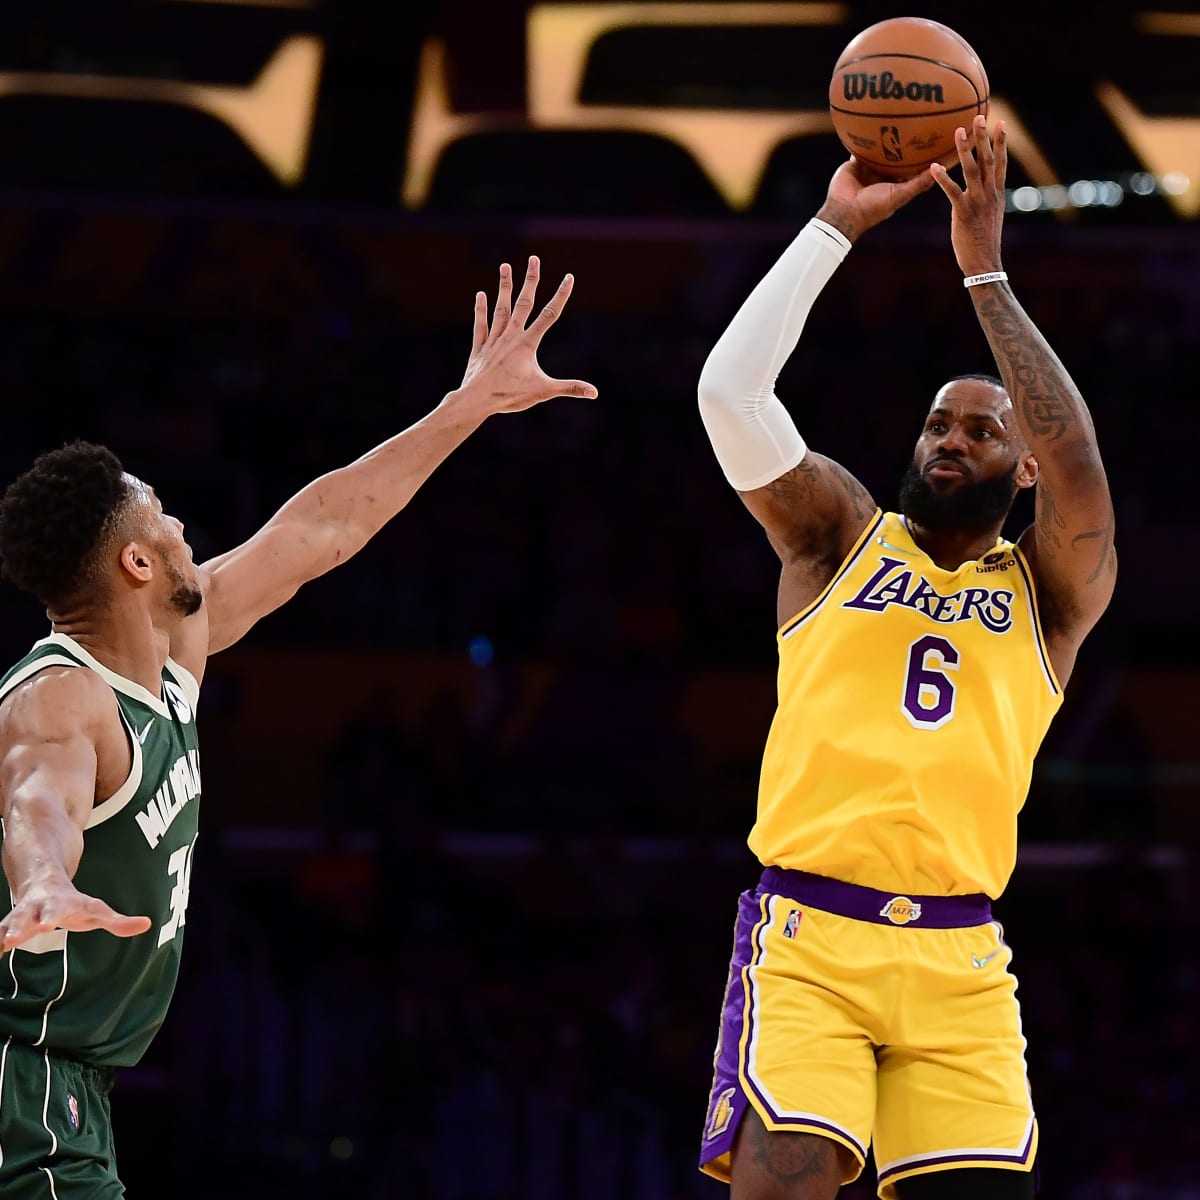 Plaschke: The Lakers must trade LeBron James. It sounds crazy, but